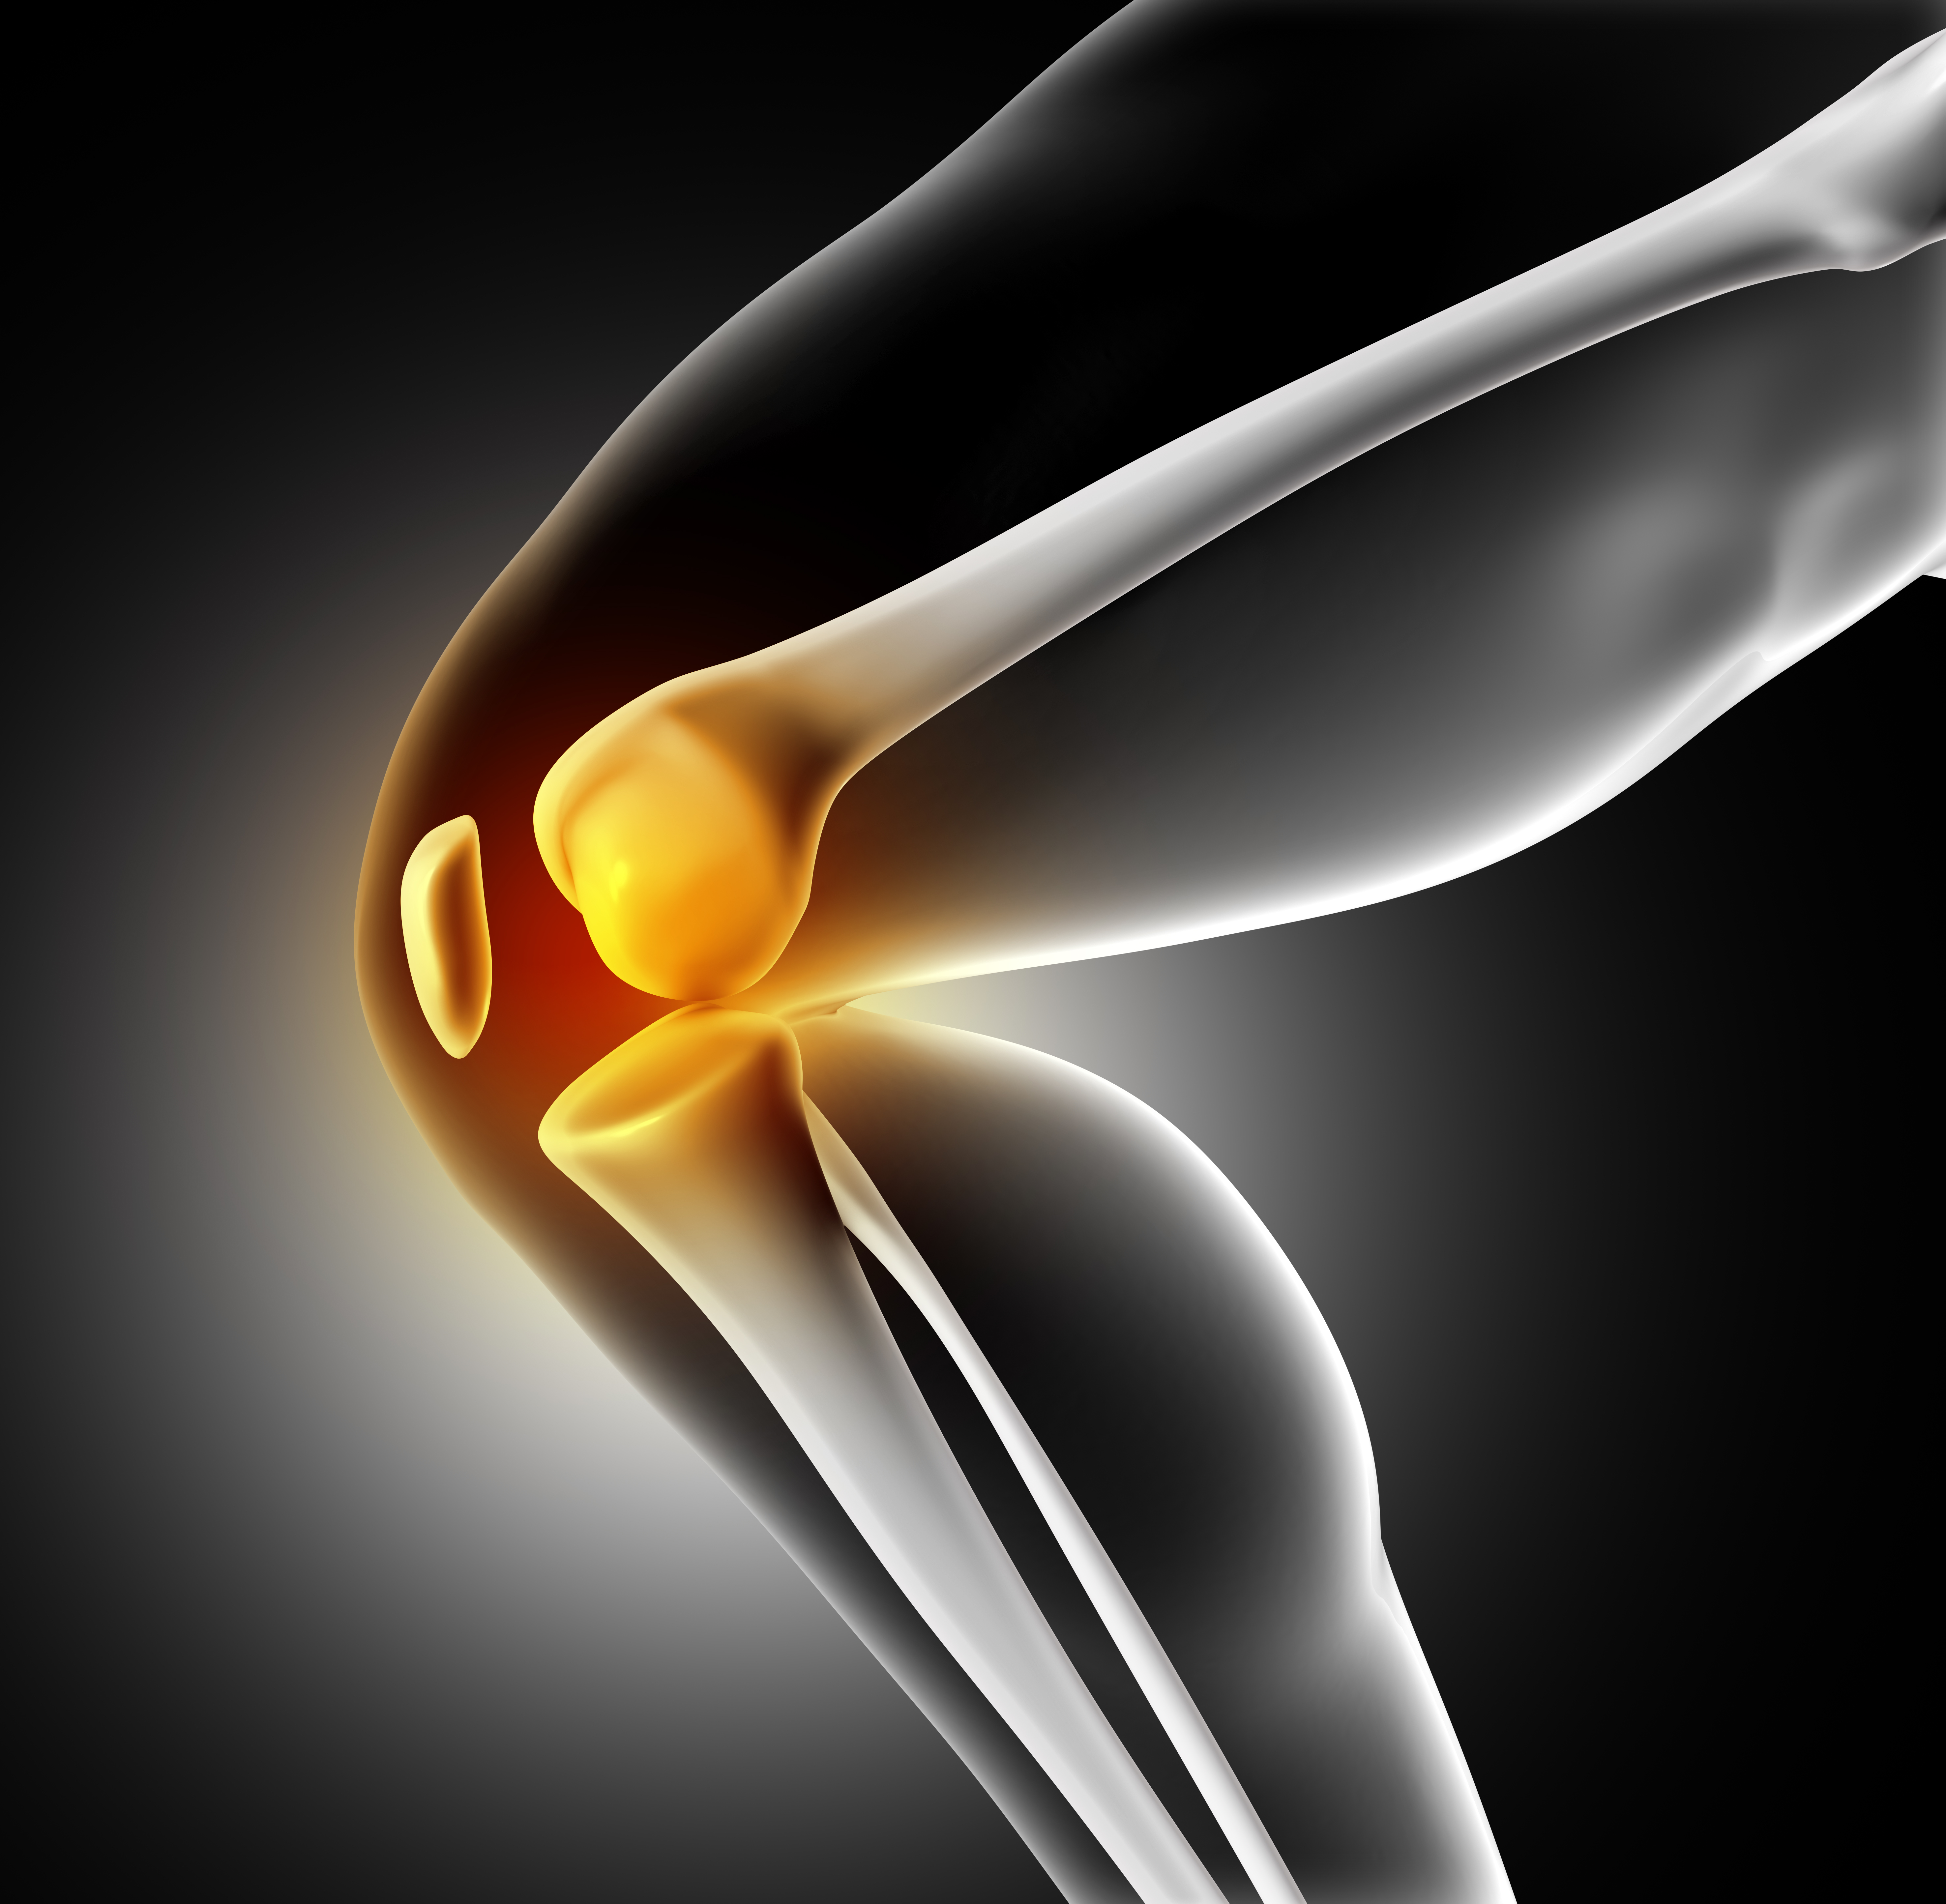 3D render of a medical image of close up of knee joint